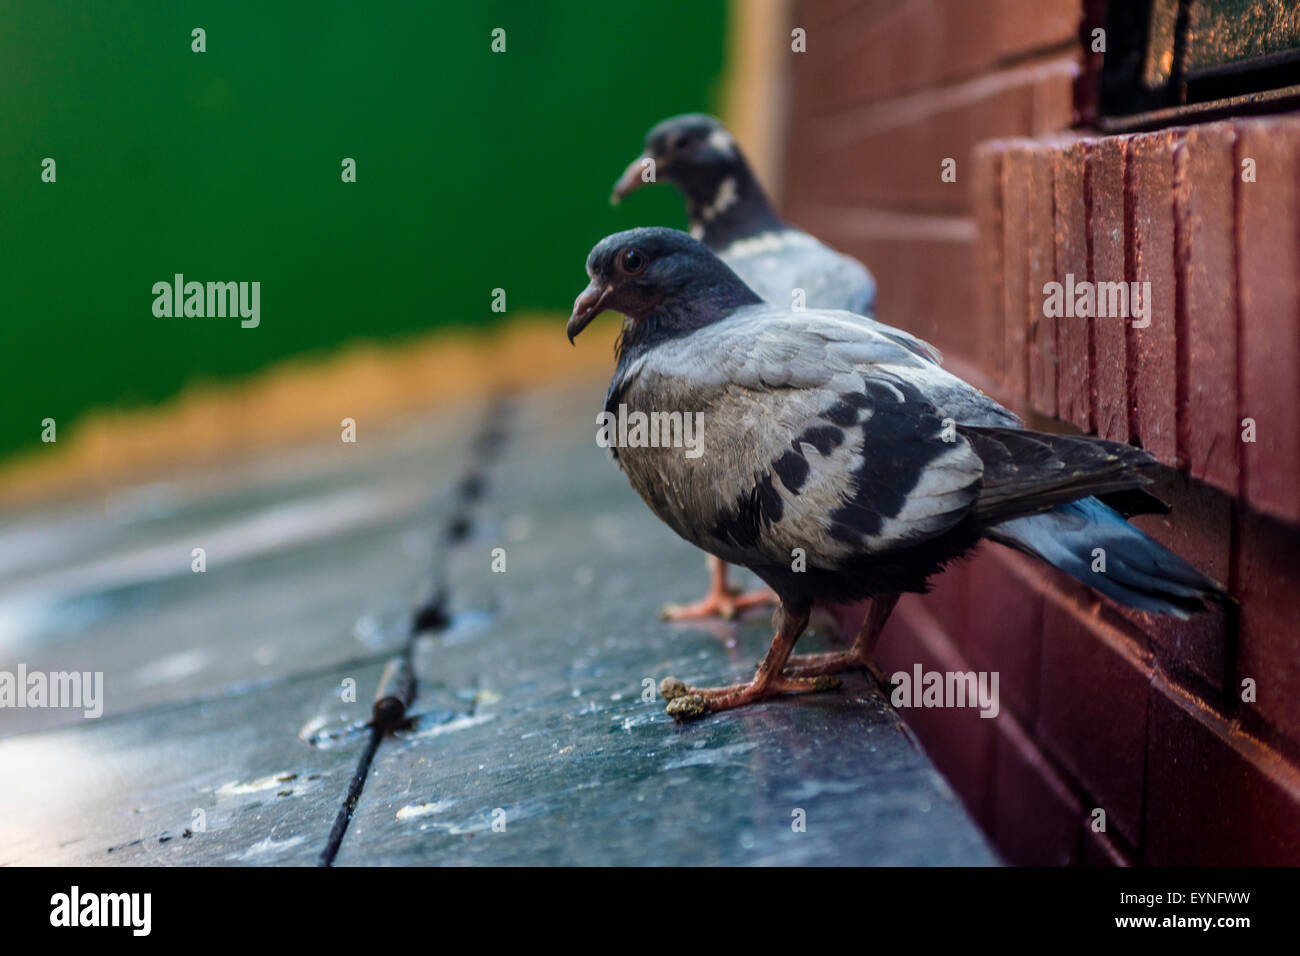 New York, NY 1 August 2015 - Fledgling pigeon chicks perched on a garbage container Stock Photo